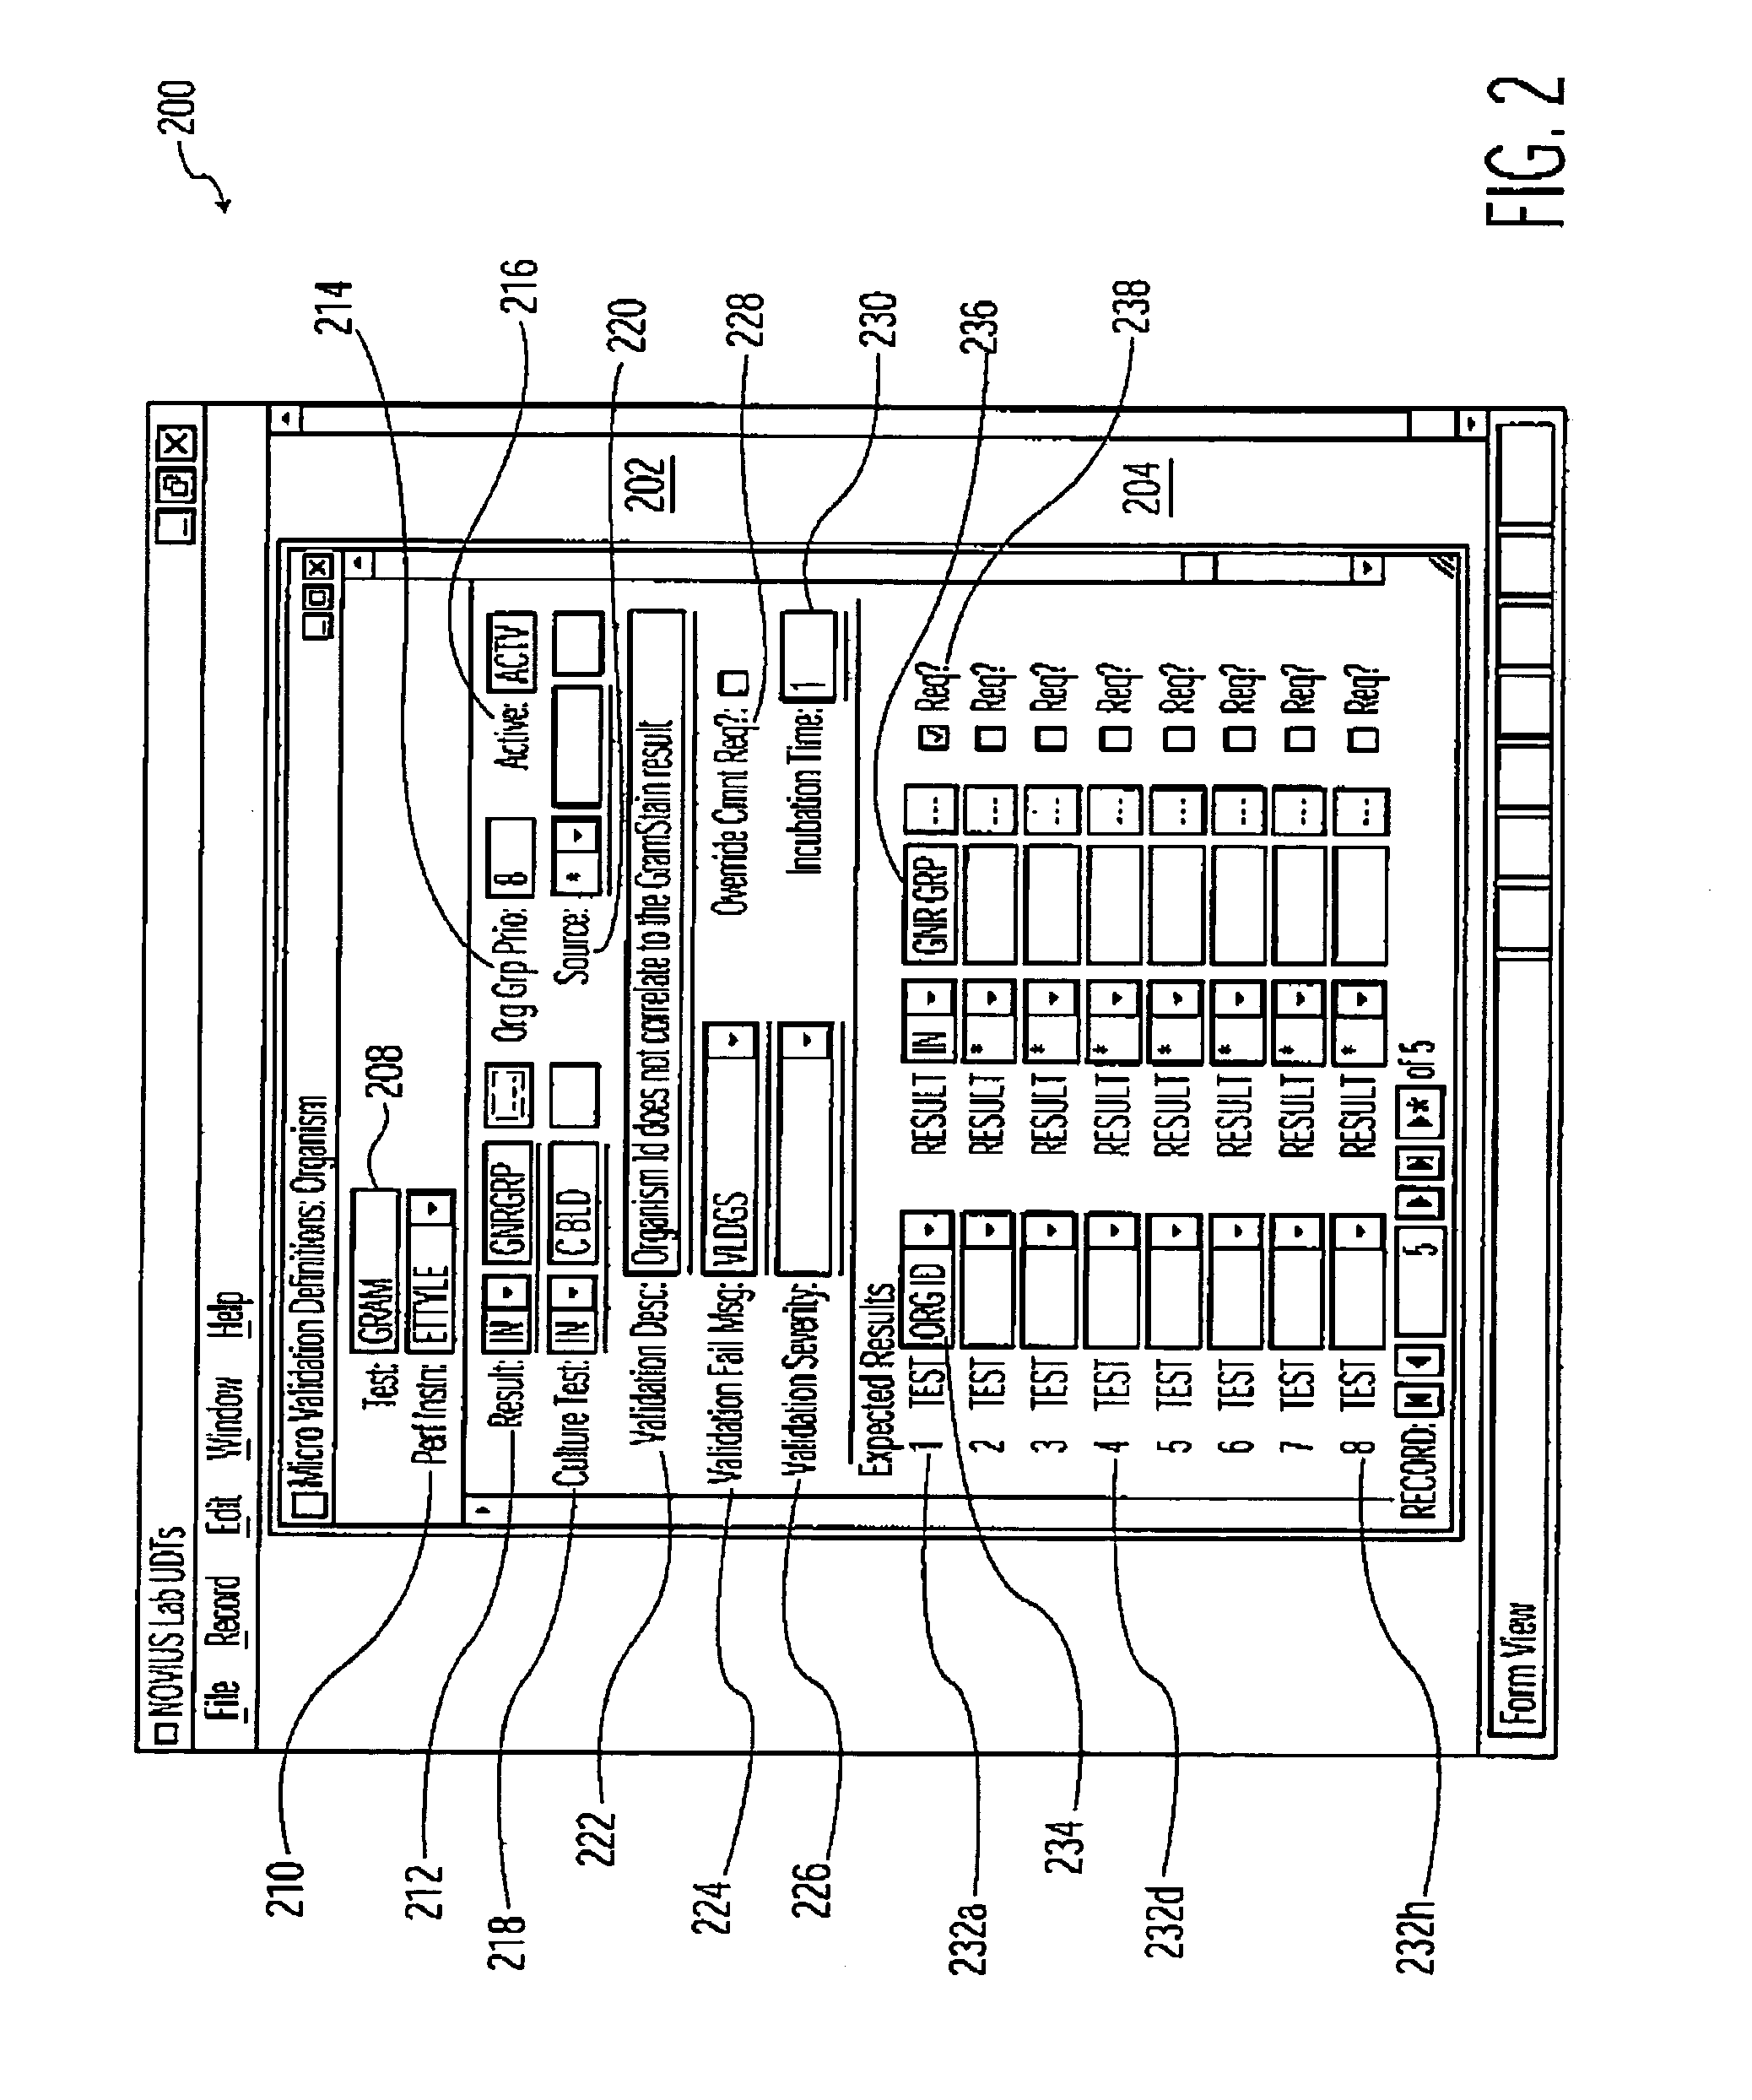 System and method for processing information related to laboratory tests and results